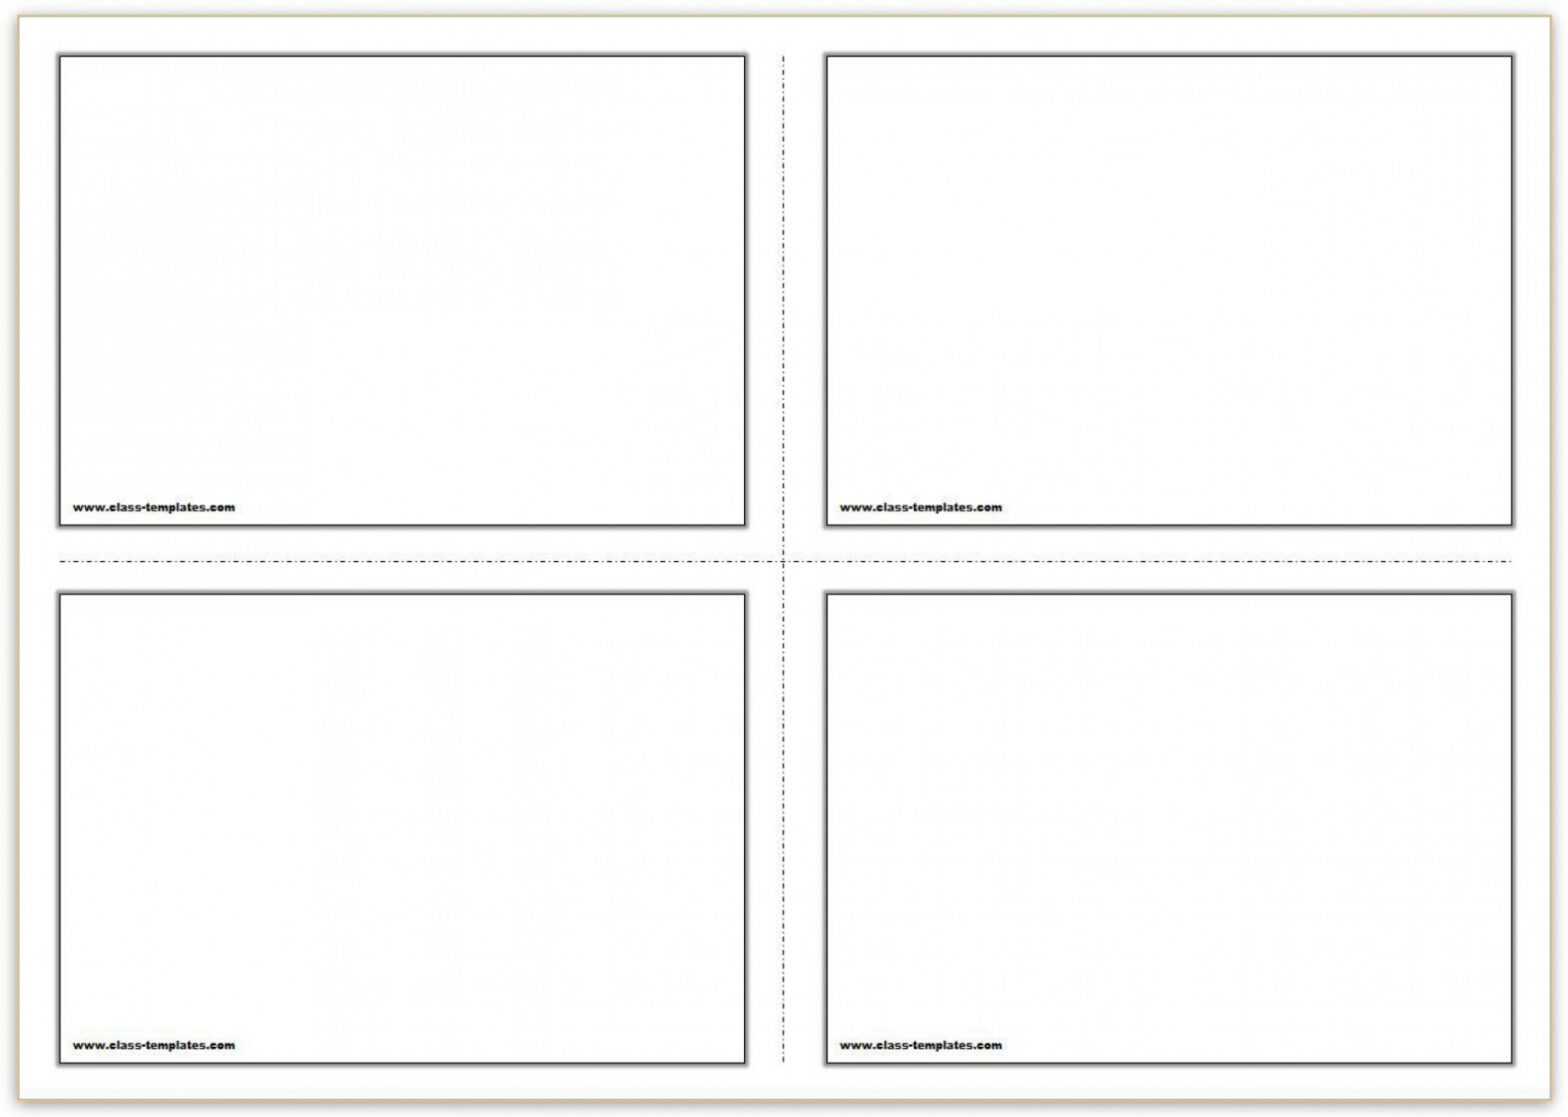 Index Card Template Word ~ Addictionary with regard to 3 X 5 Index Card Template